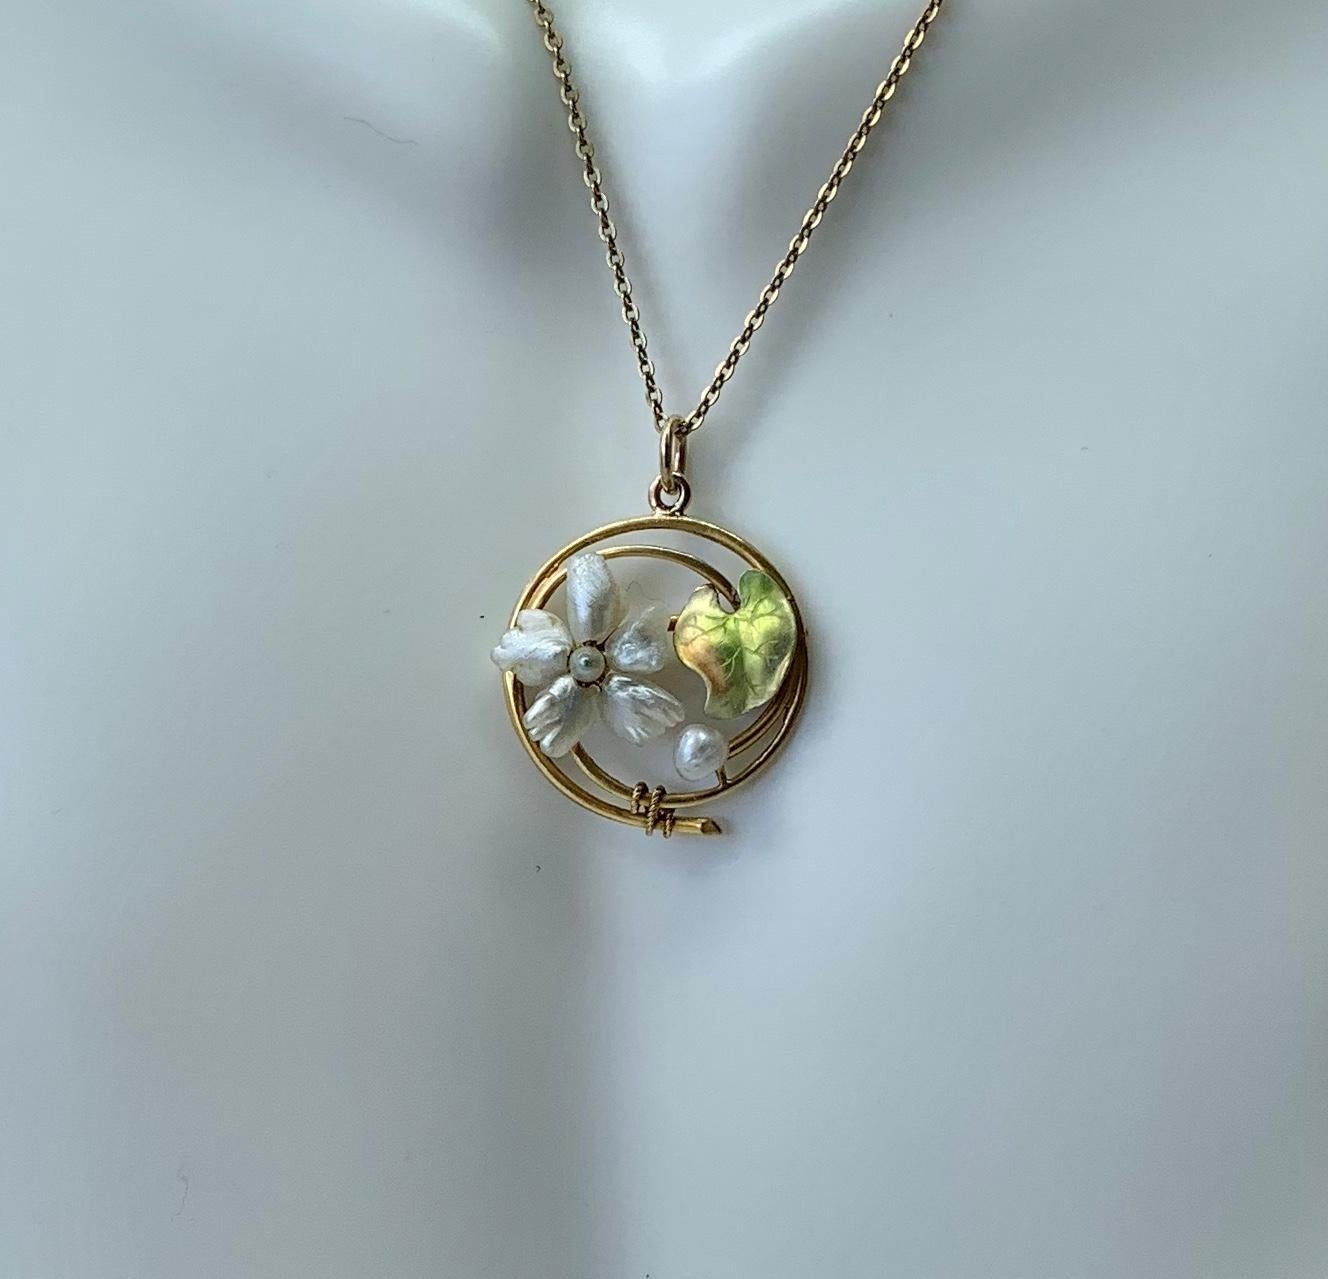 THIS IS A GORGEOUS VICTORIAN - ART NOUVEAU PENDANT WITH THE MOST BEAUTIFUL FORGET-ME-NOT FLOWER AND LILY PAD MOTIF WITH EXQUISITE IRIDESCENT ENAMEL AND ELEGANT NATURAL PEARLS.  THE FLOWER AND LILY PAD ARE SET IN A GOLD SURROUND WITH LOVELY ART